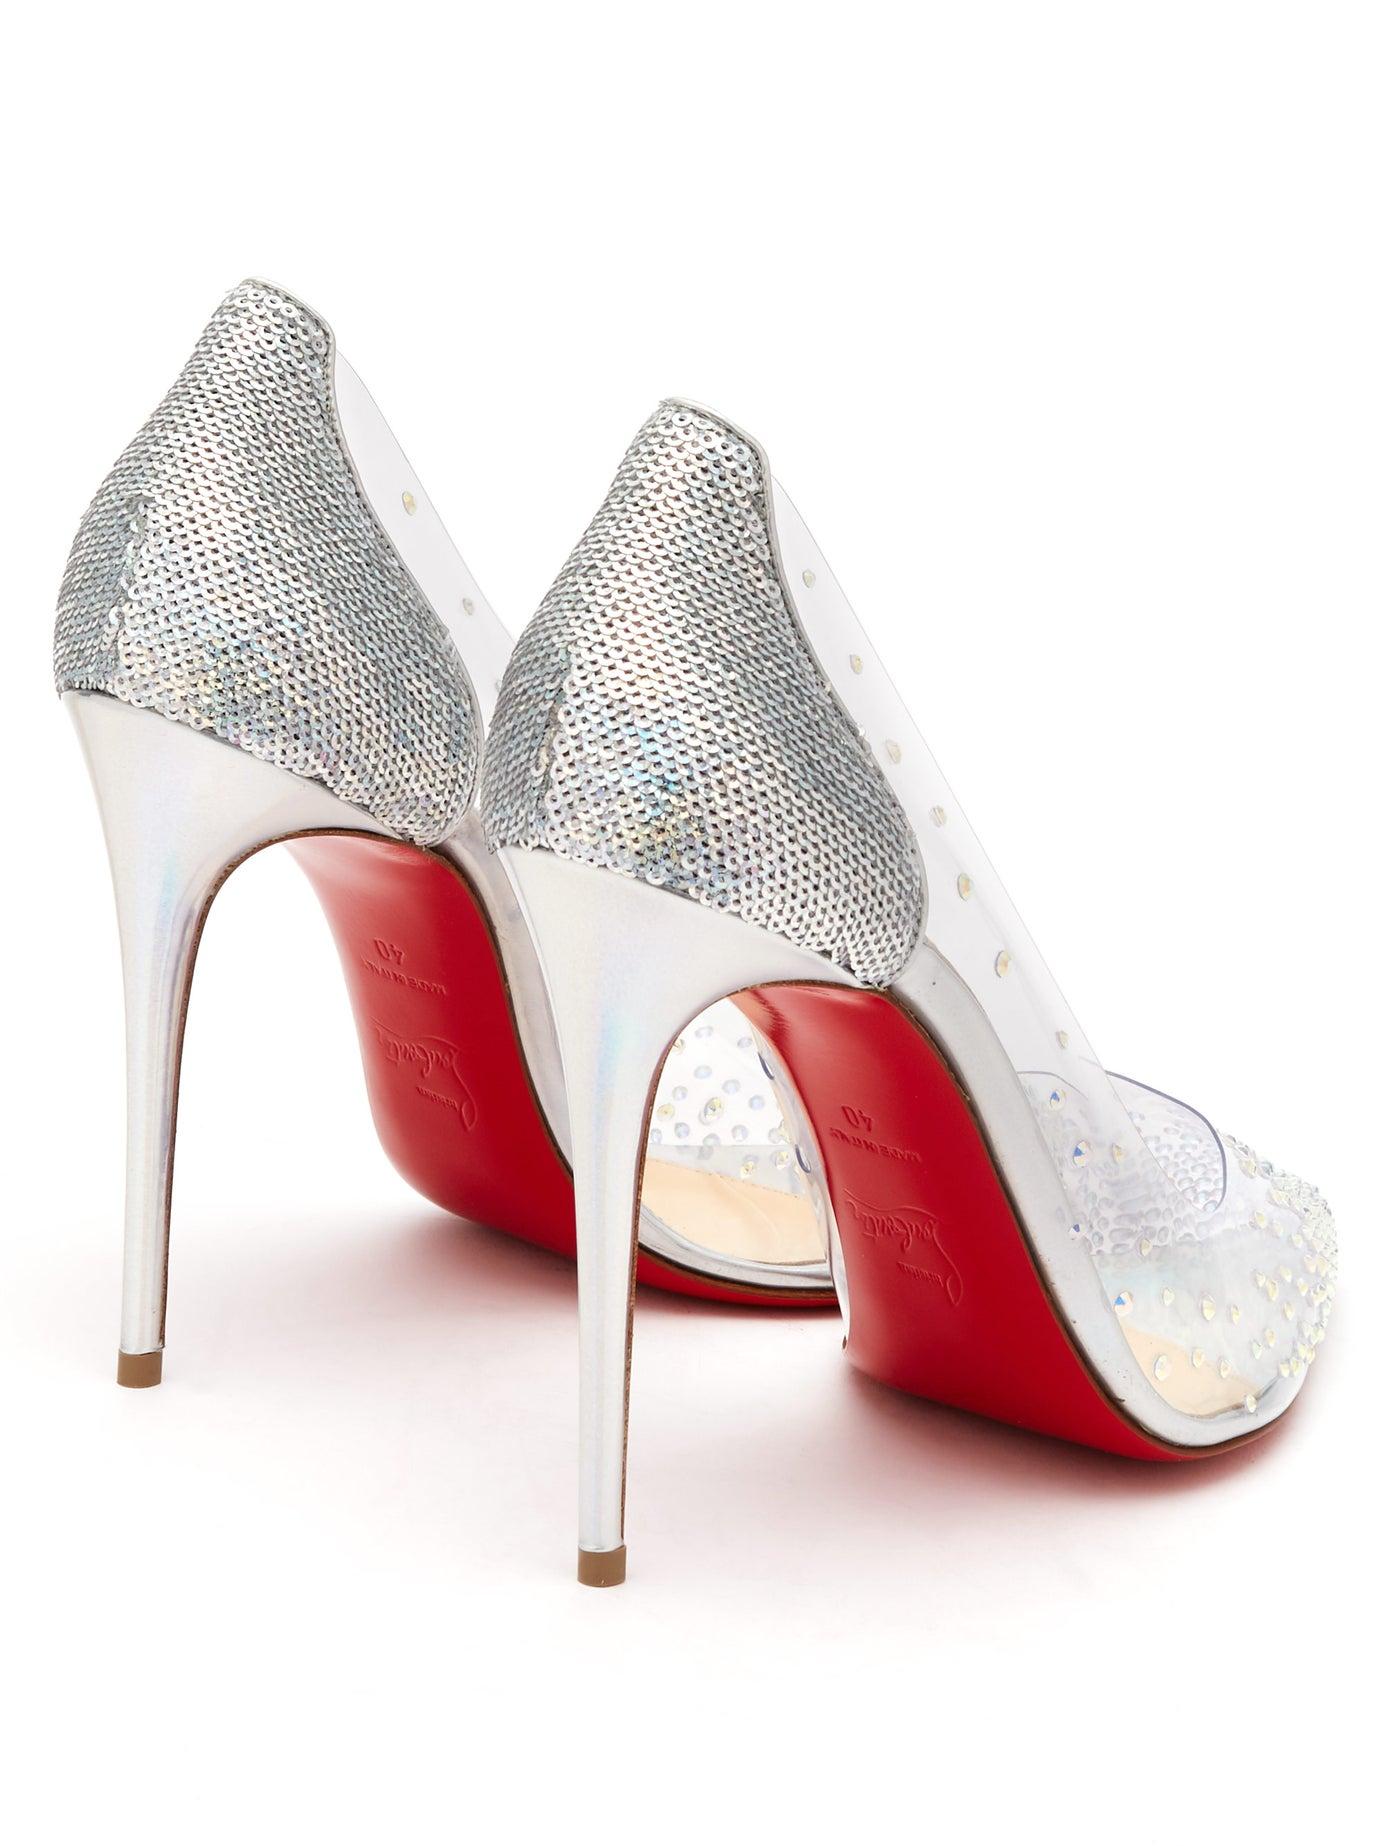 Christian Louboutin Degrastrass 100 Crystal-embellished Pvc Pumps in  Metallic | Lyst